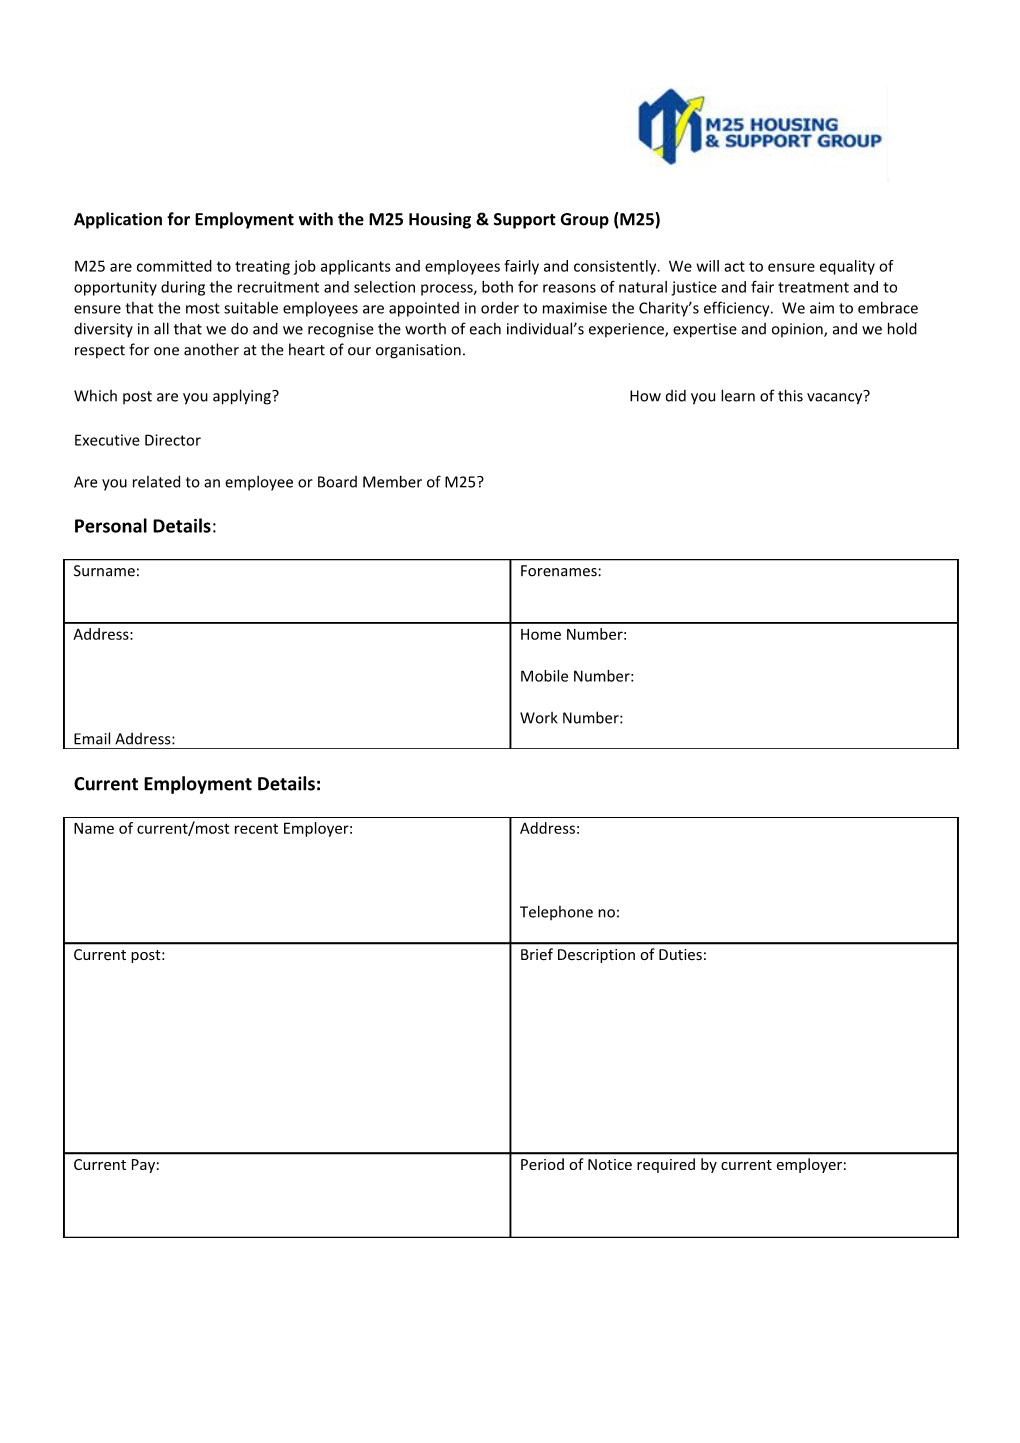 Application for Employment with the M25 Housing & Support Group (M25)